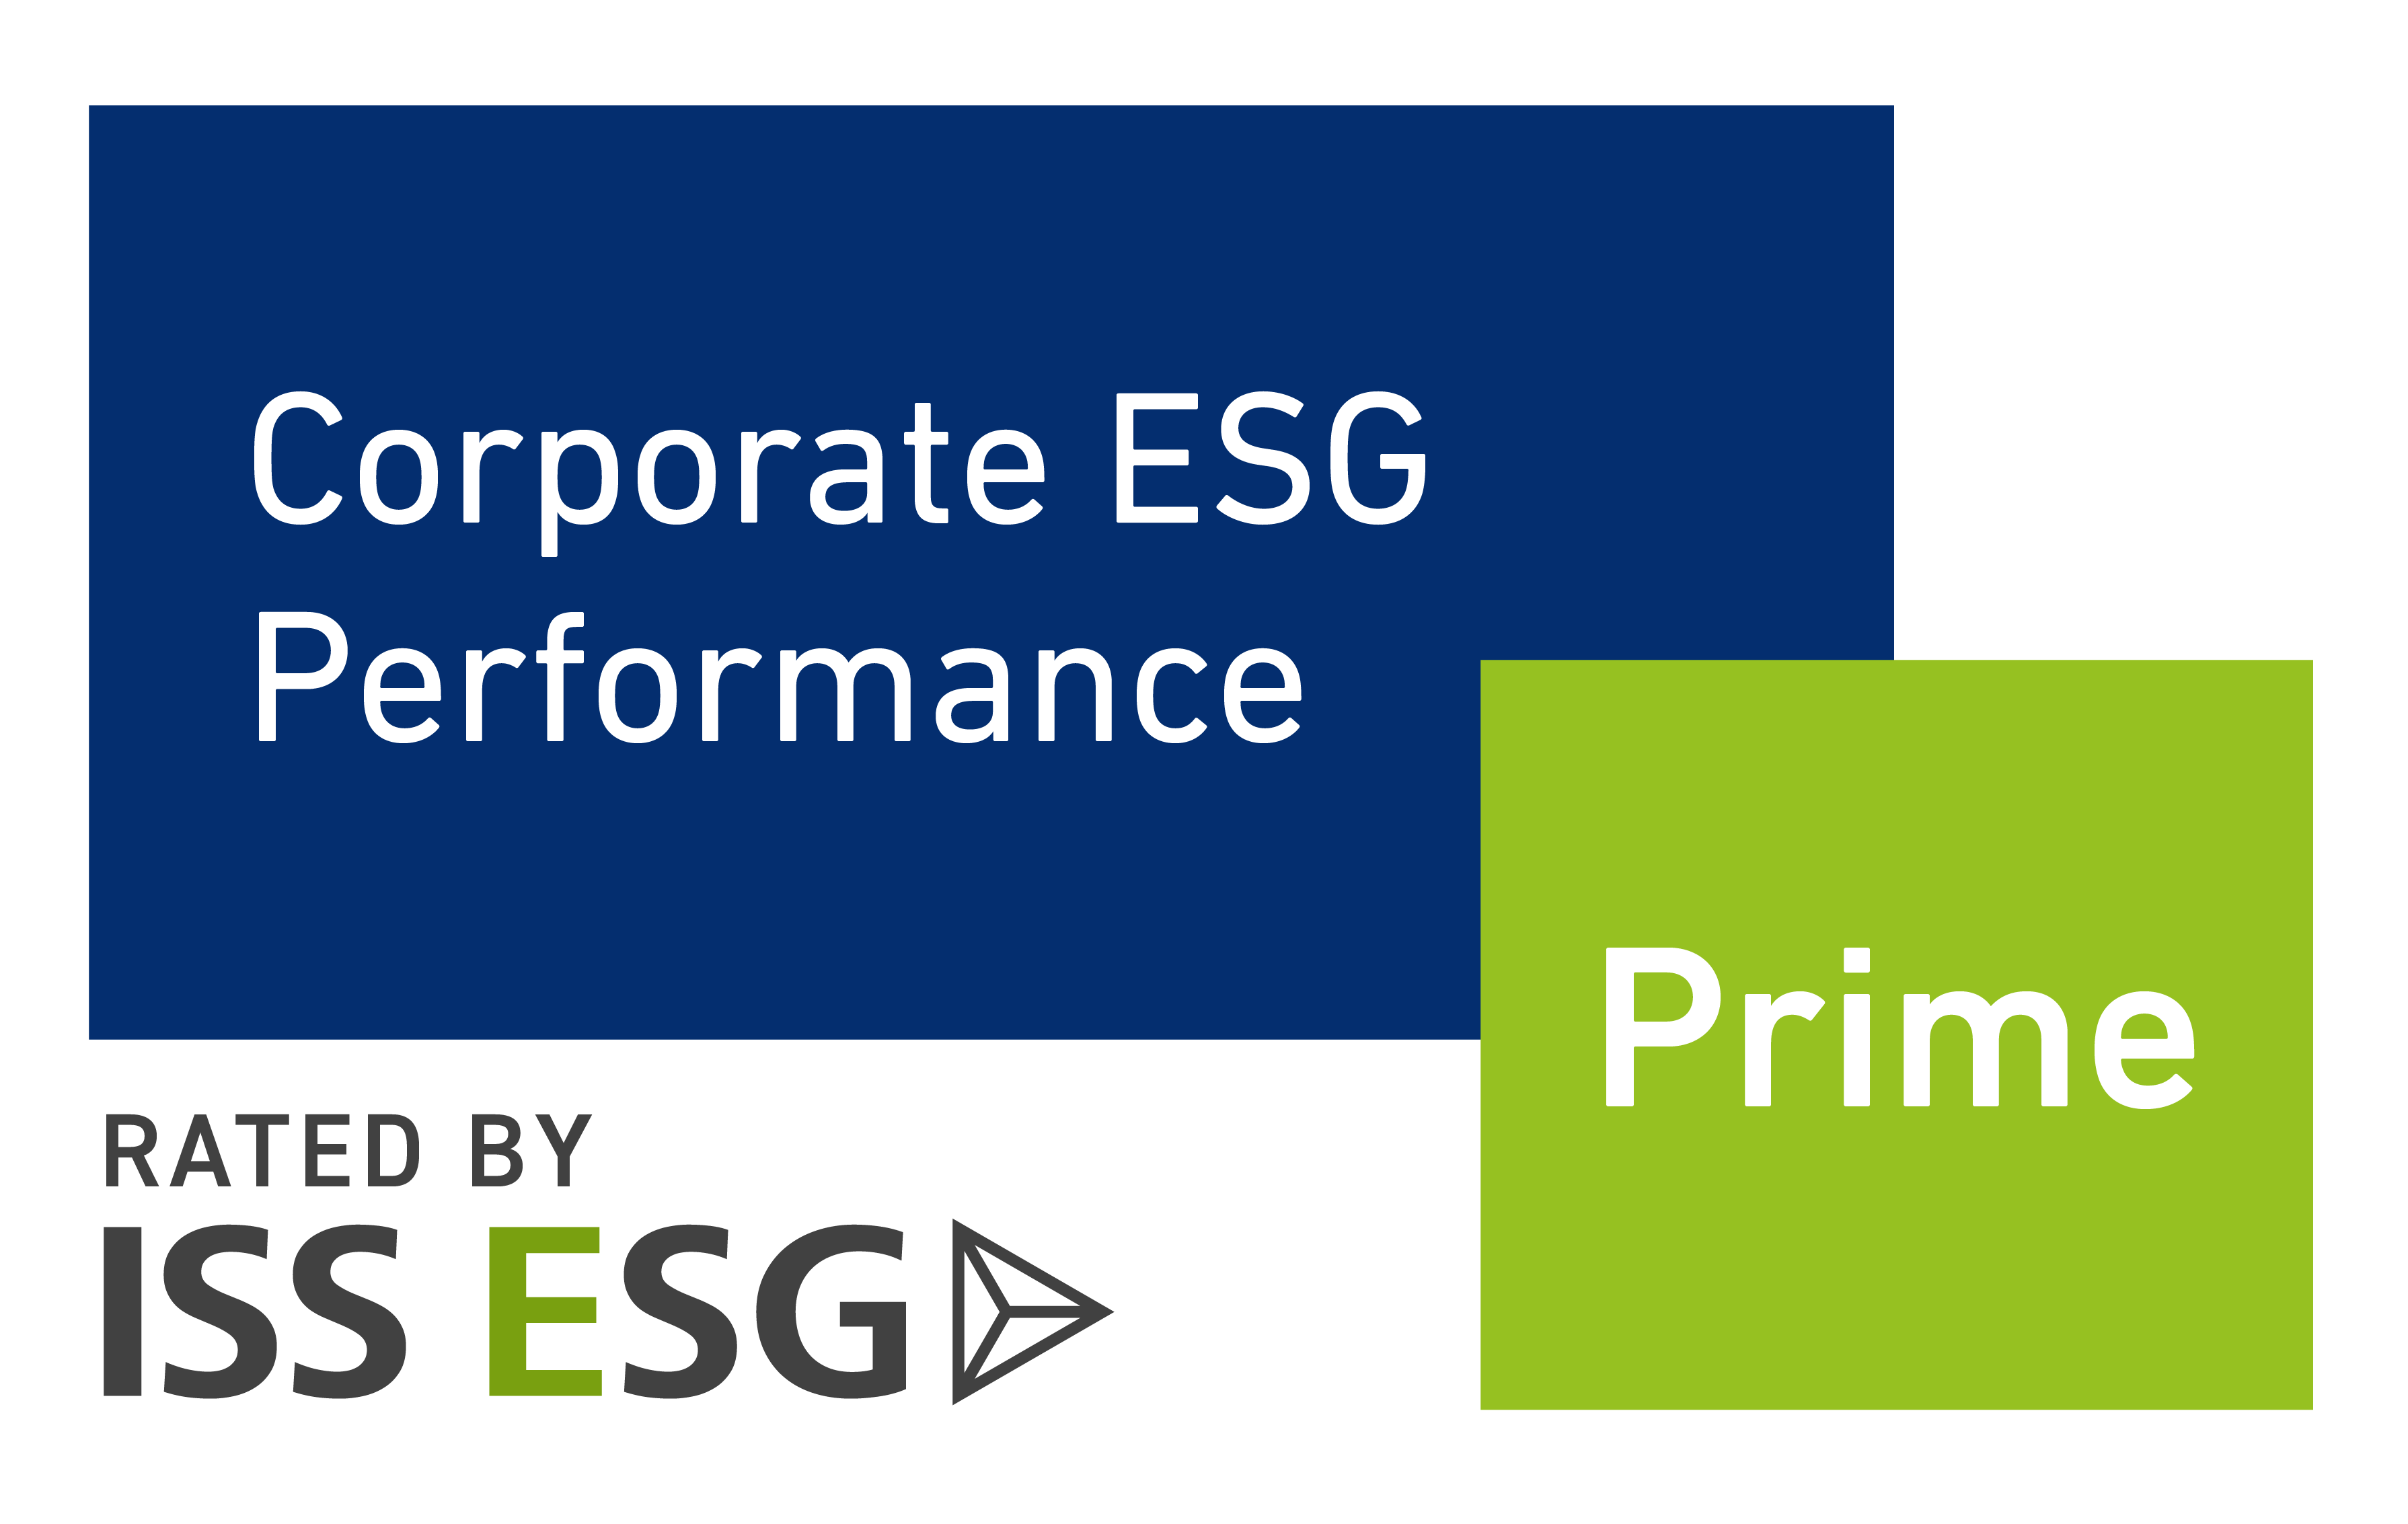 Corporate ESG Performance badge rated by ISS ESG